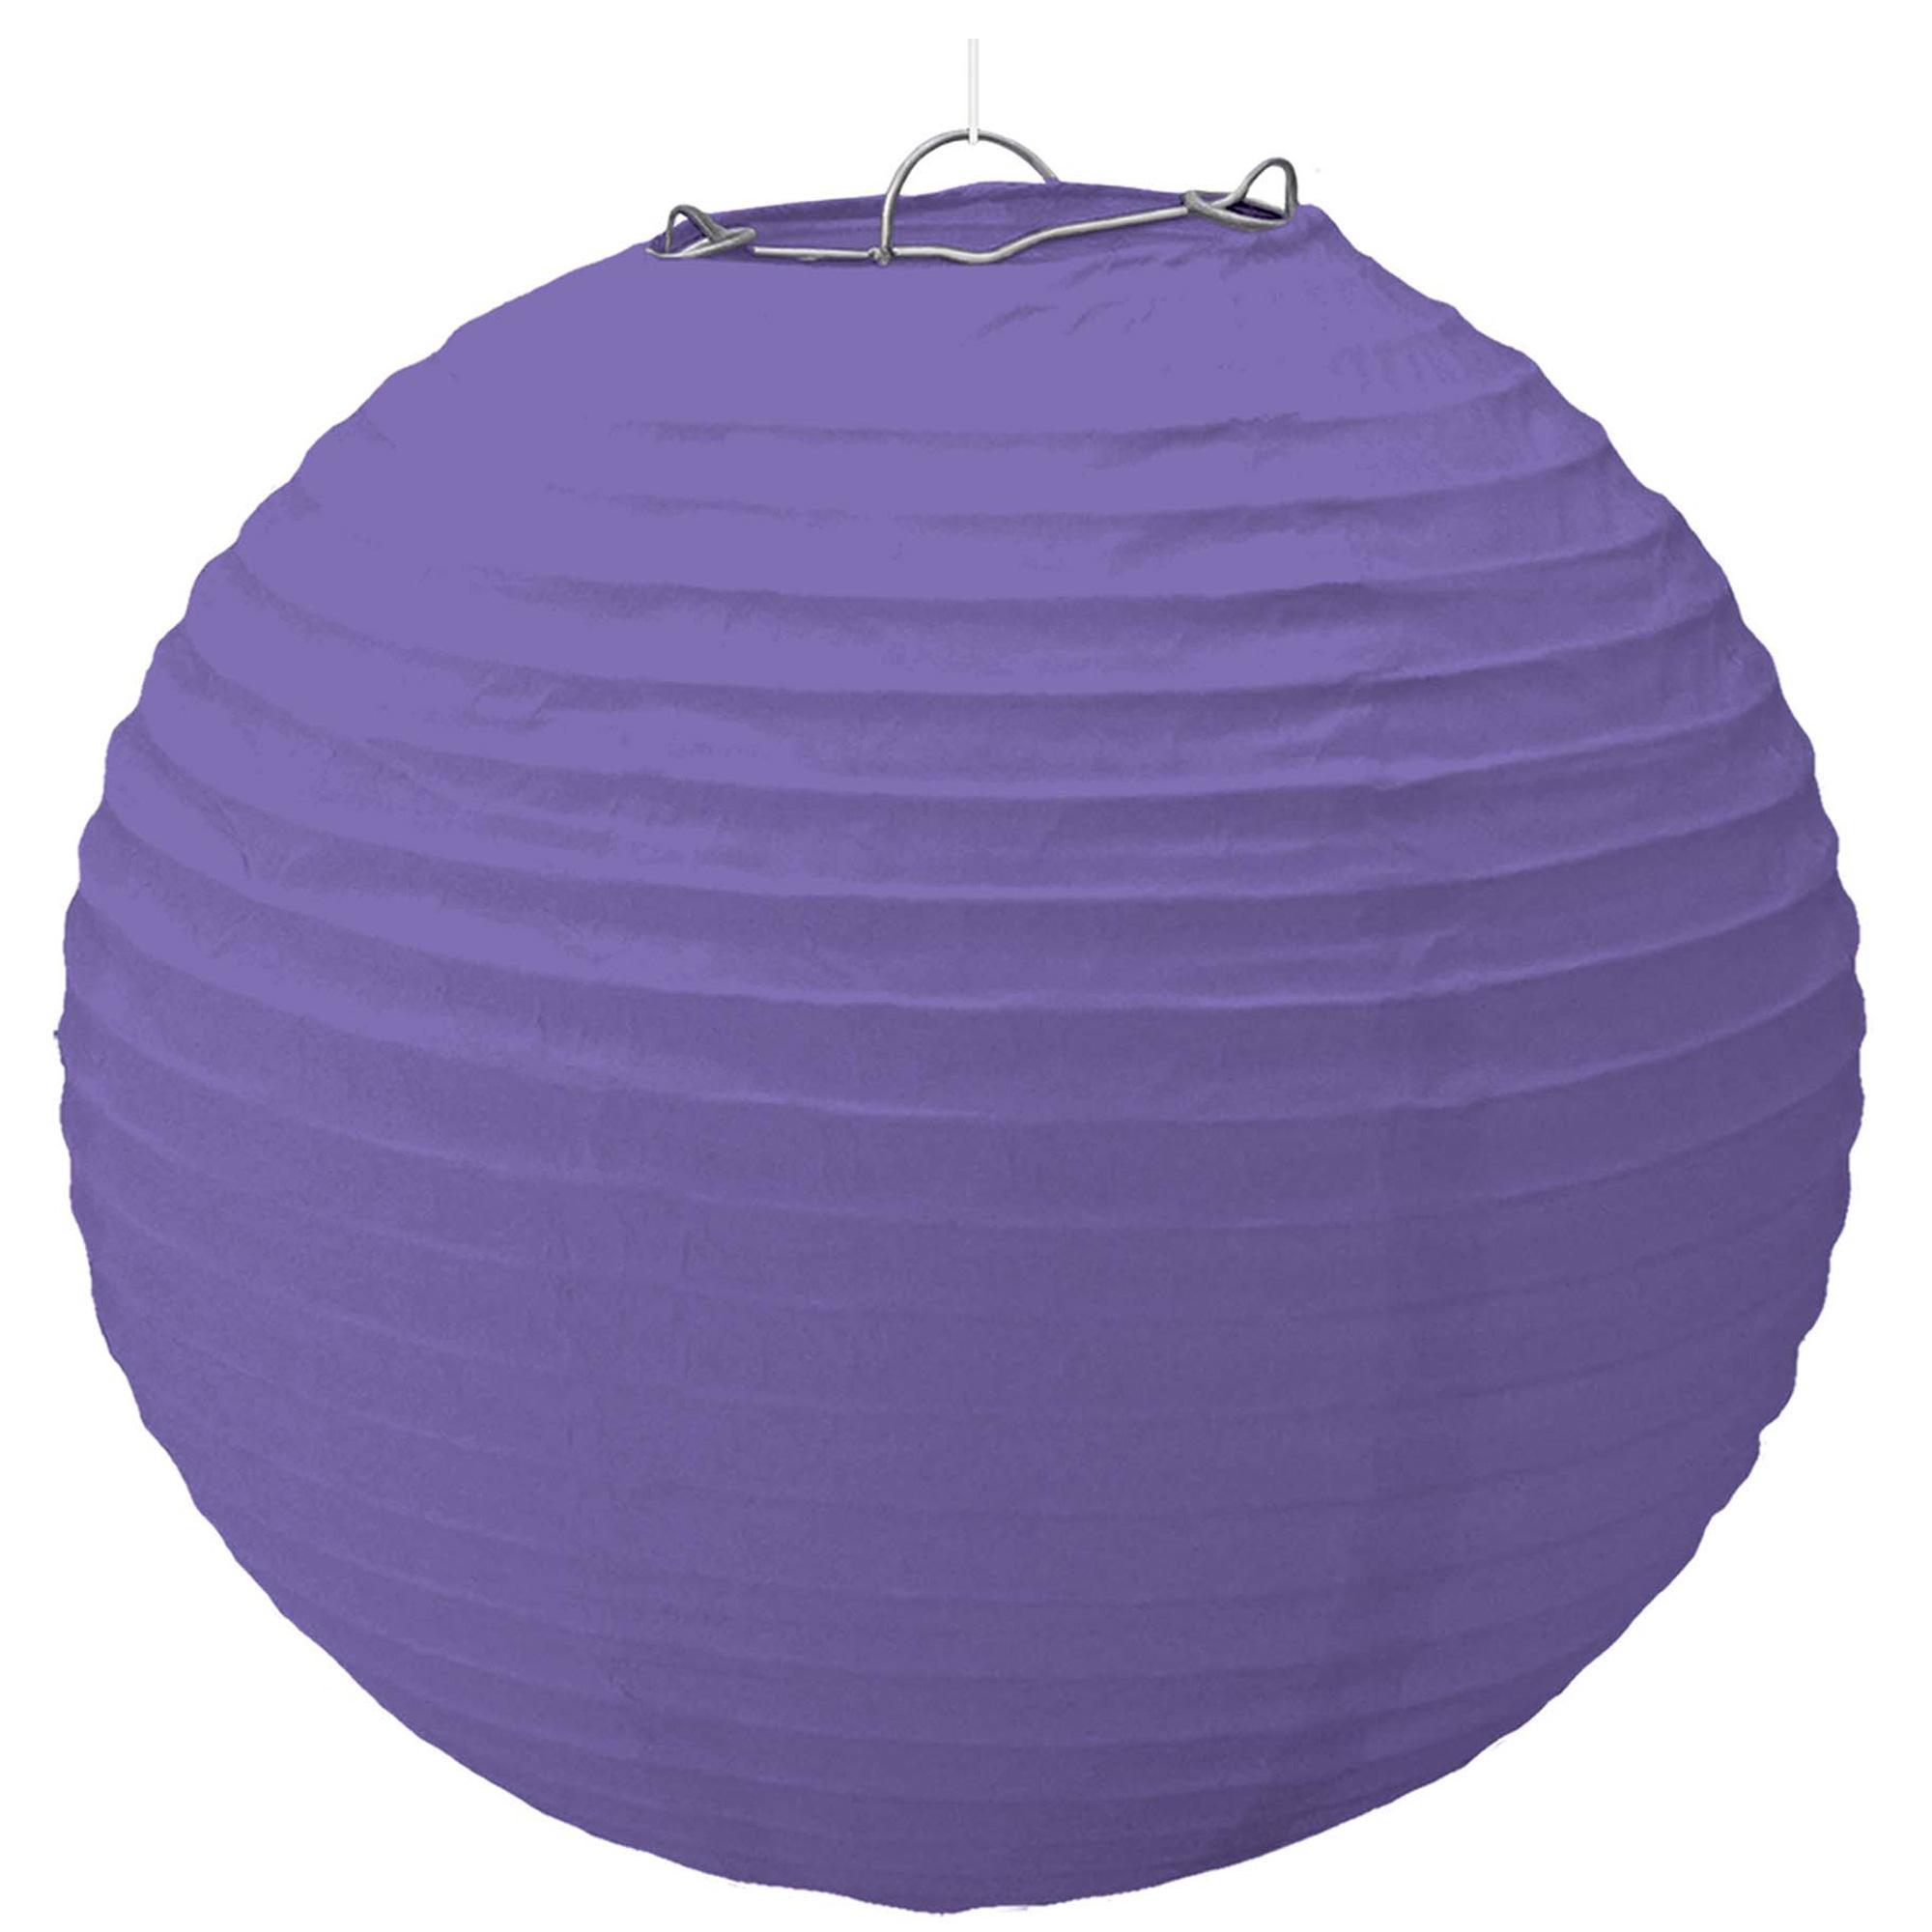 New Purple Paper Lantern With Metal Frame 15.50in Decorations - Party Centre